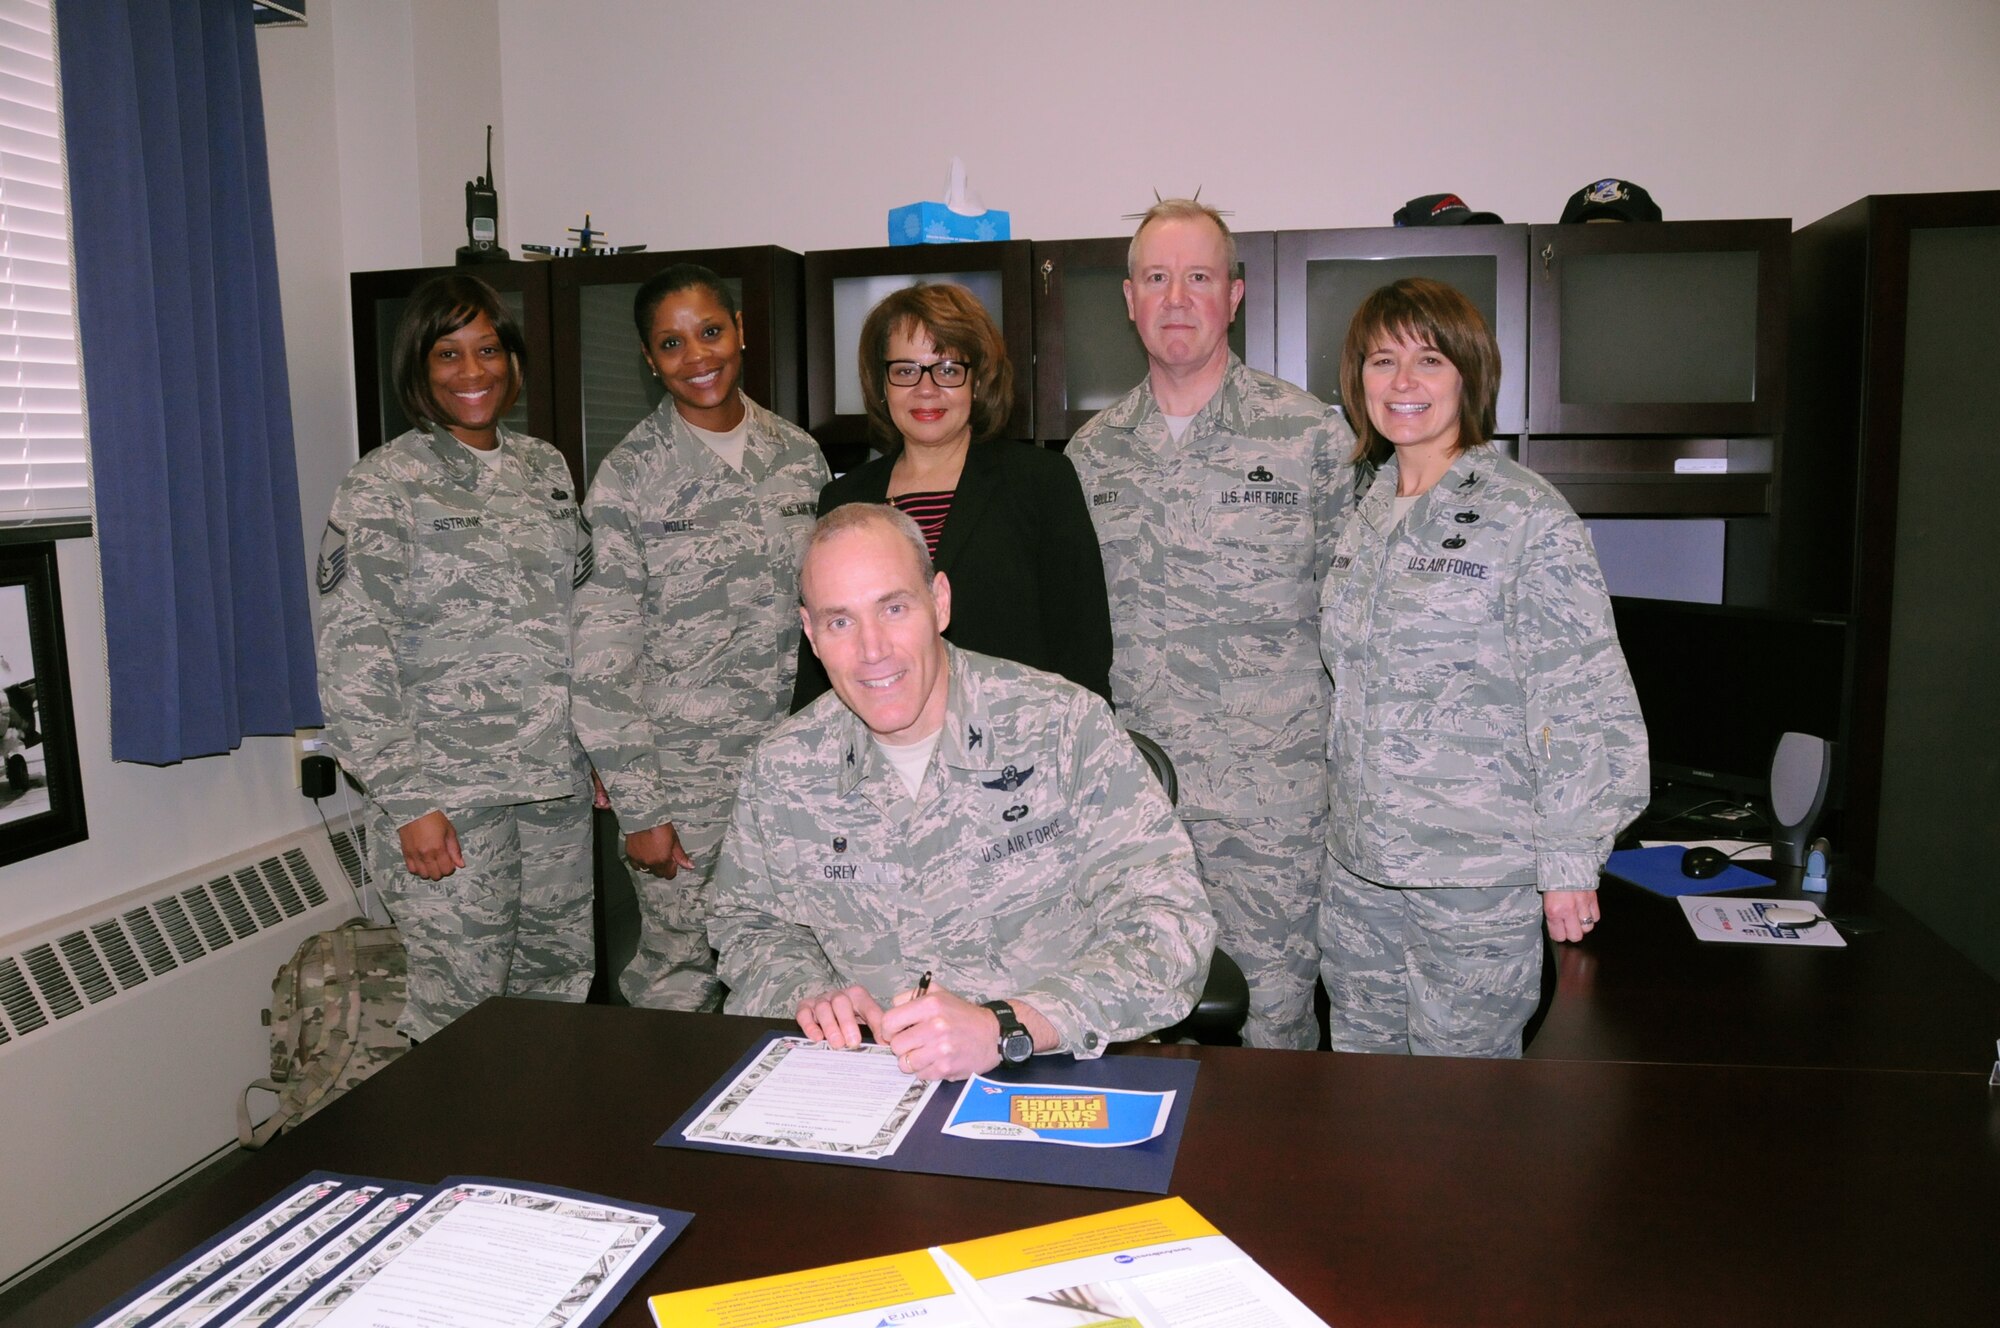 Col. Robert J. Grey, 192nd Fighter Wing commander and Fighter Wing staff members kicked off the “2015 Military Saves Week” by signing a Proclamation encouraging Airmen and family members to participate in the “Military Saves” initiative by setting goals, making a plan and increasing personal savings to improve their overall quality of life. 
As part of this initiative, the 192nd Airman and Family Readiness Programs office is partnering with local and statewide personal financial counselors to offer military families financial education classes throughout the week as well as one-on-one counseling appointments to help people build wealth, not debt. (U.S. Air National Guard photo by Tech. Sgt. Jonathan G. Garcia/Released) 


Learn more at www.militarysaves.org or contact Ms. Angeli Wade at 757-764-2388
